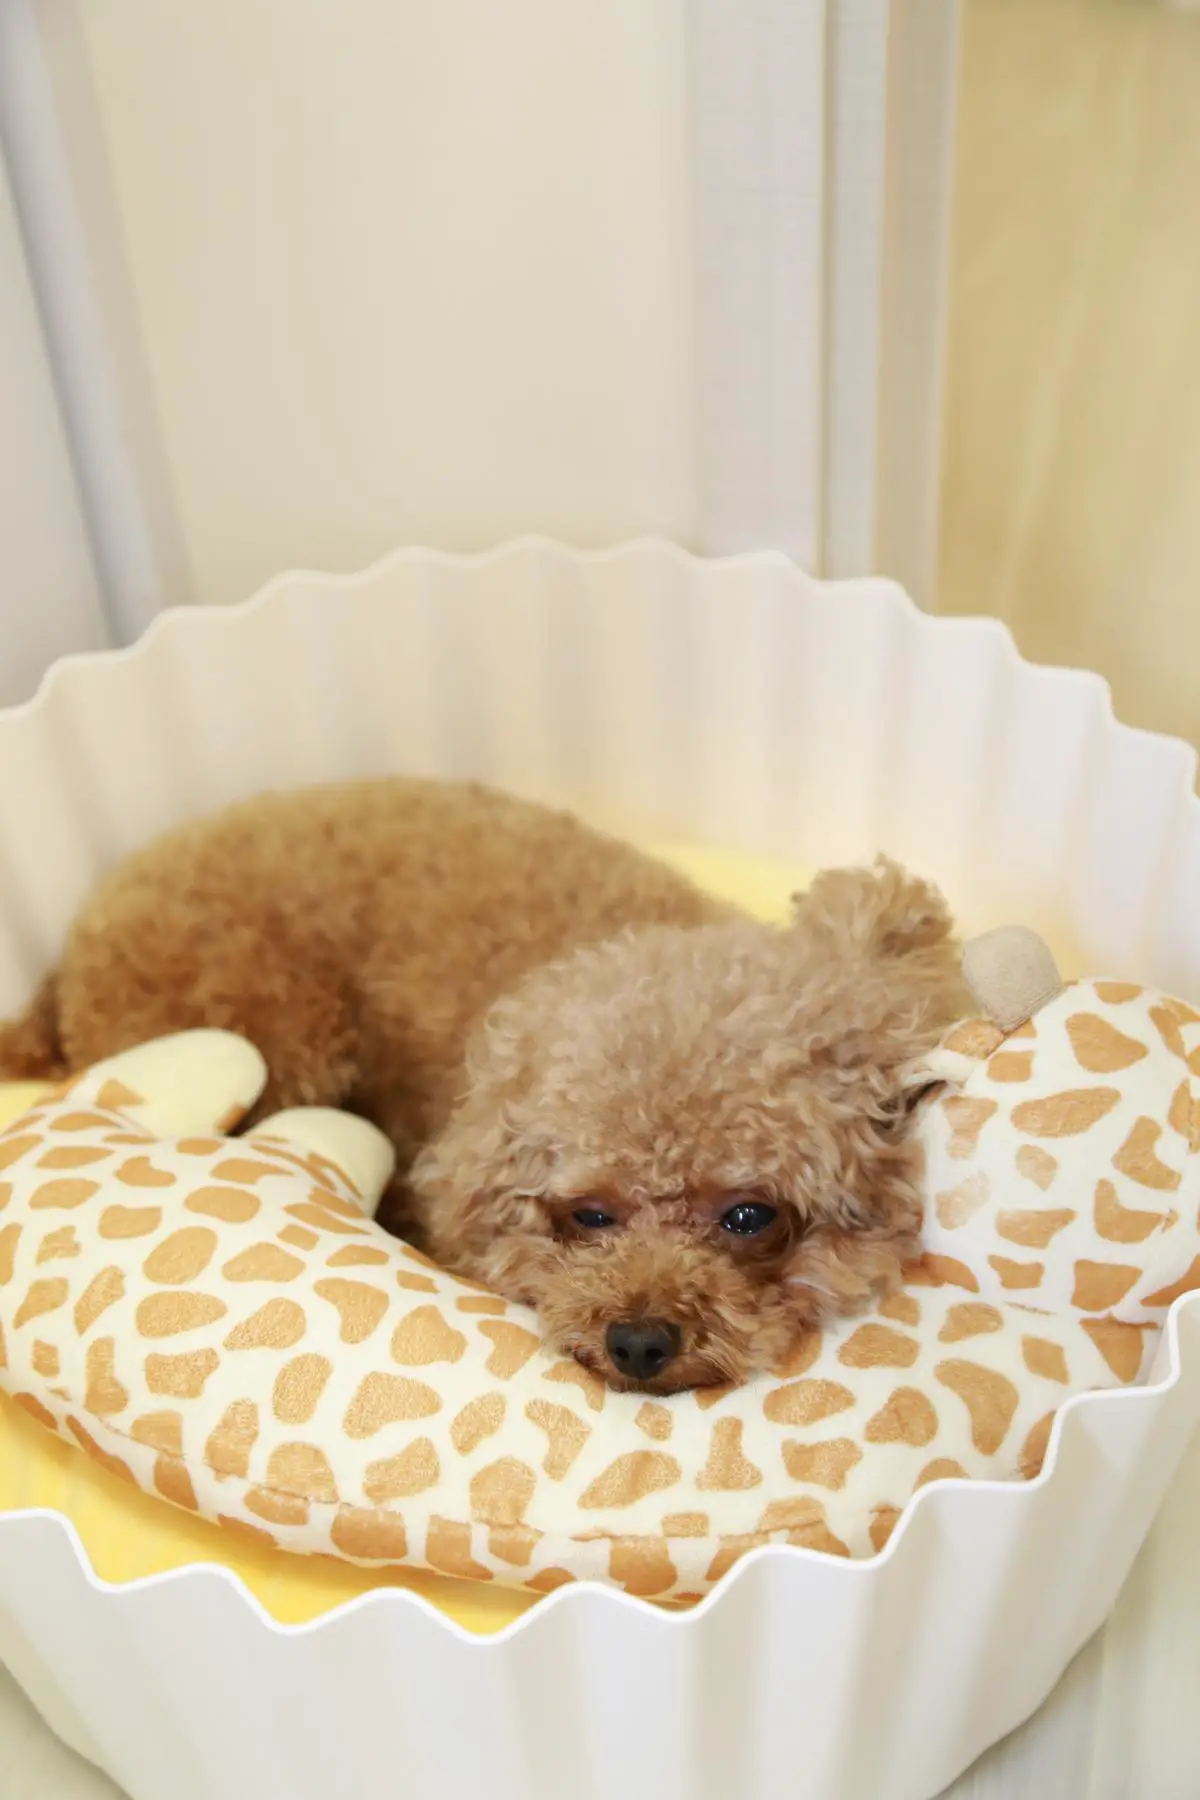 A Teacup Poodle resting on a blanket, looking cute and fluffy